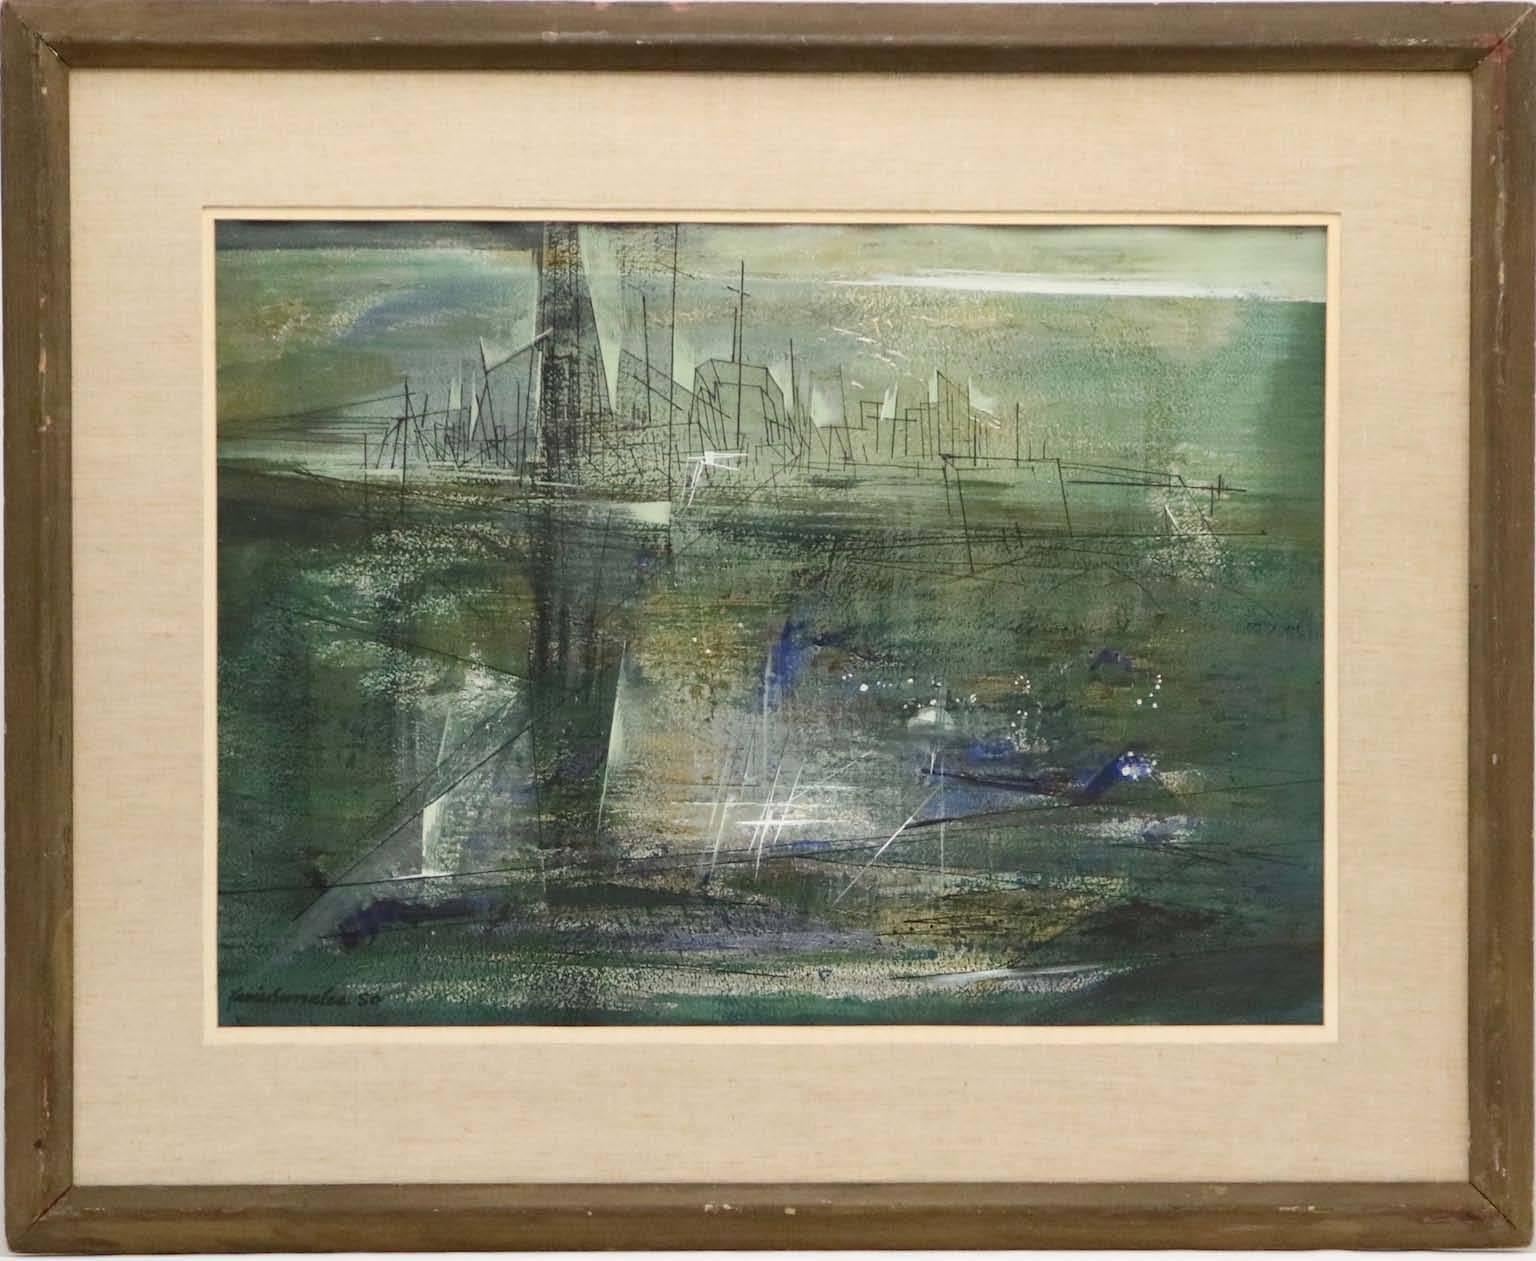 An mixed media abstract landscape on paper by Xavier Gonzalez (1898 - 1993), signed and framed. Markings include the artist's signature, dated 1950 to the lower left corner. Excellent condition, consistent with age.

A painter of landscapes and